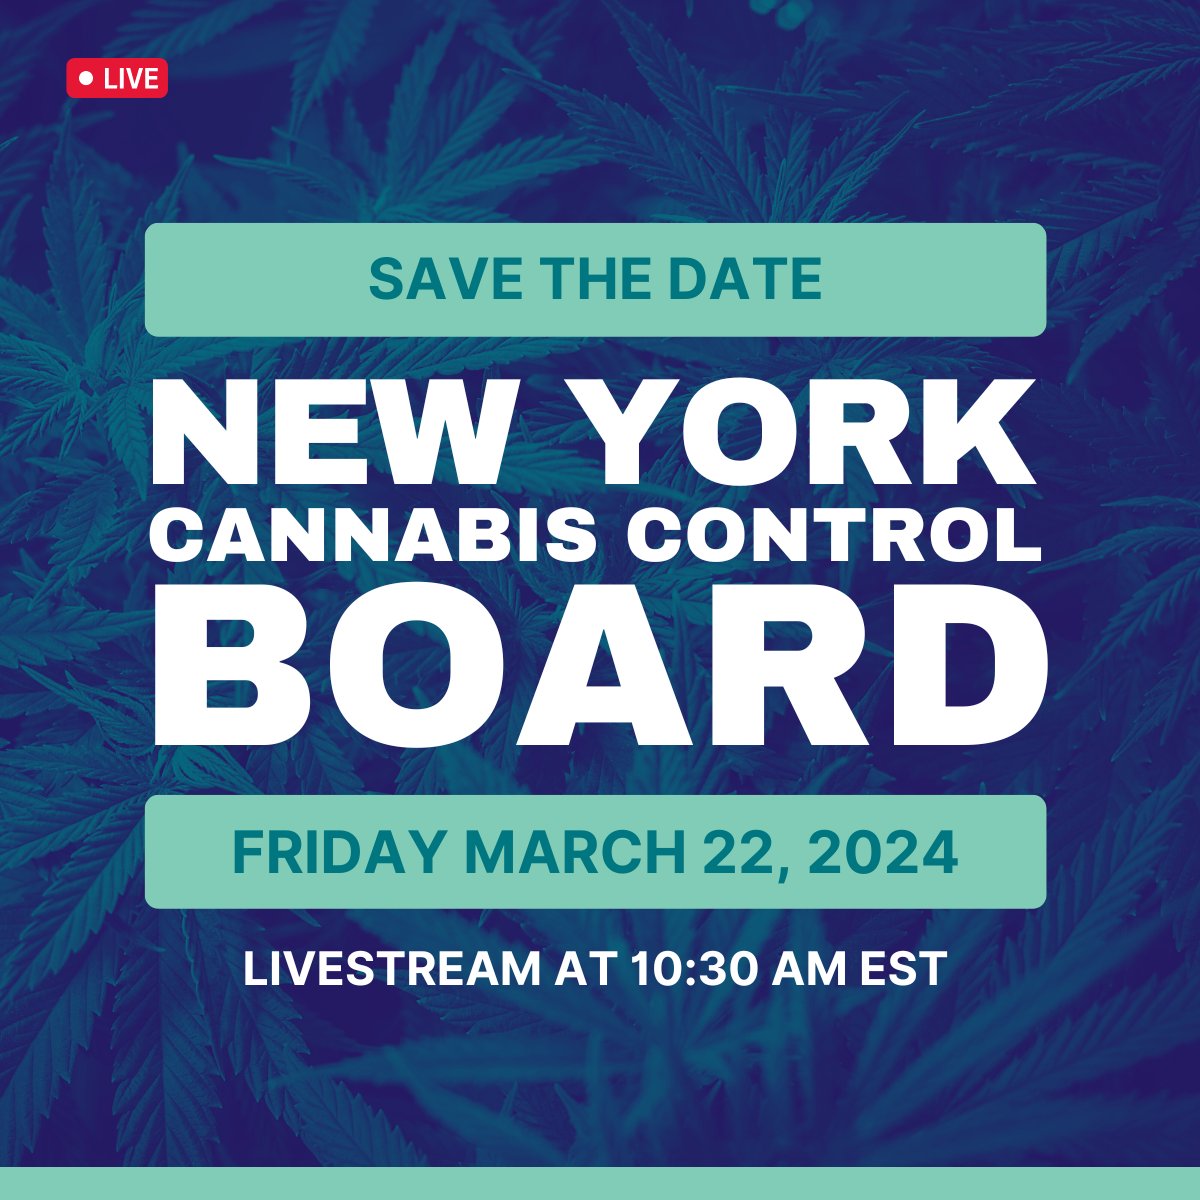 The #NYCCB will host a public board meeting Friday, 3/22 at 10:30 AM. For more information on how to join in-person or via livestream, visit: cannabis.ny.gov/cannabis-contr…